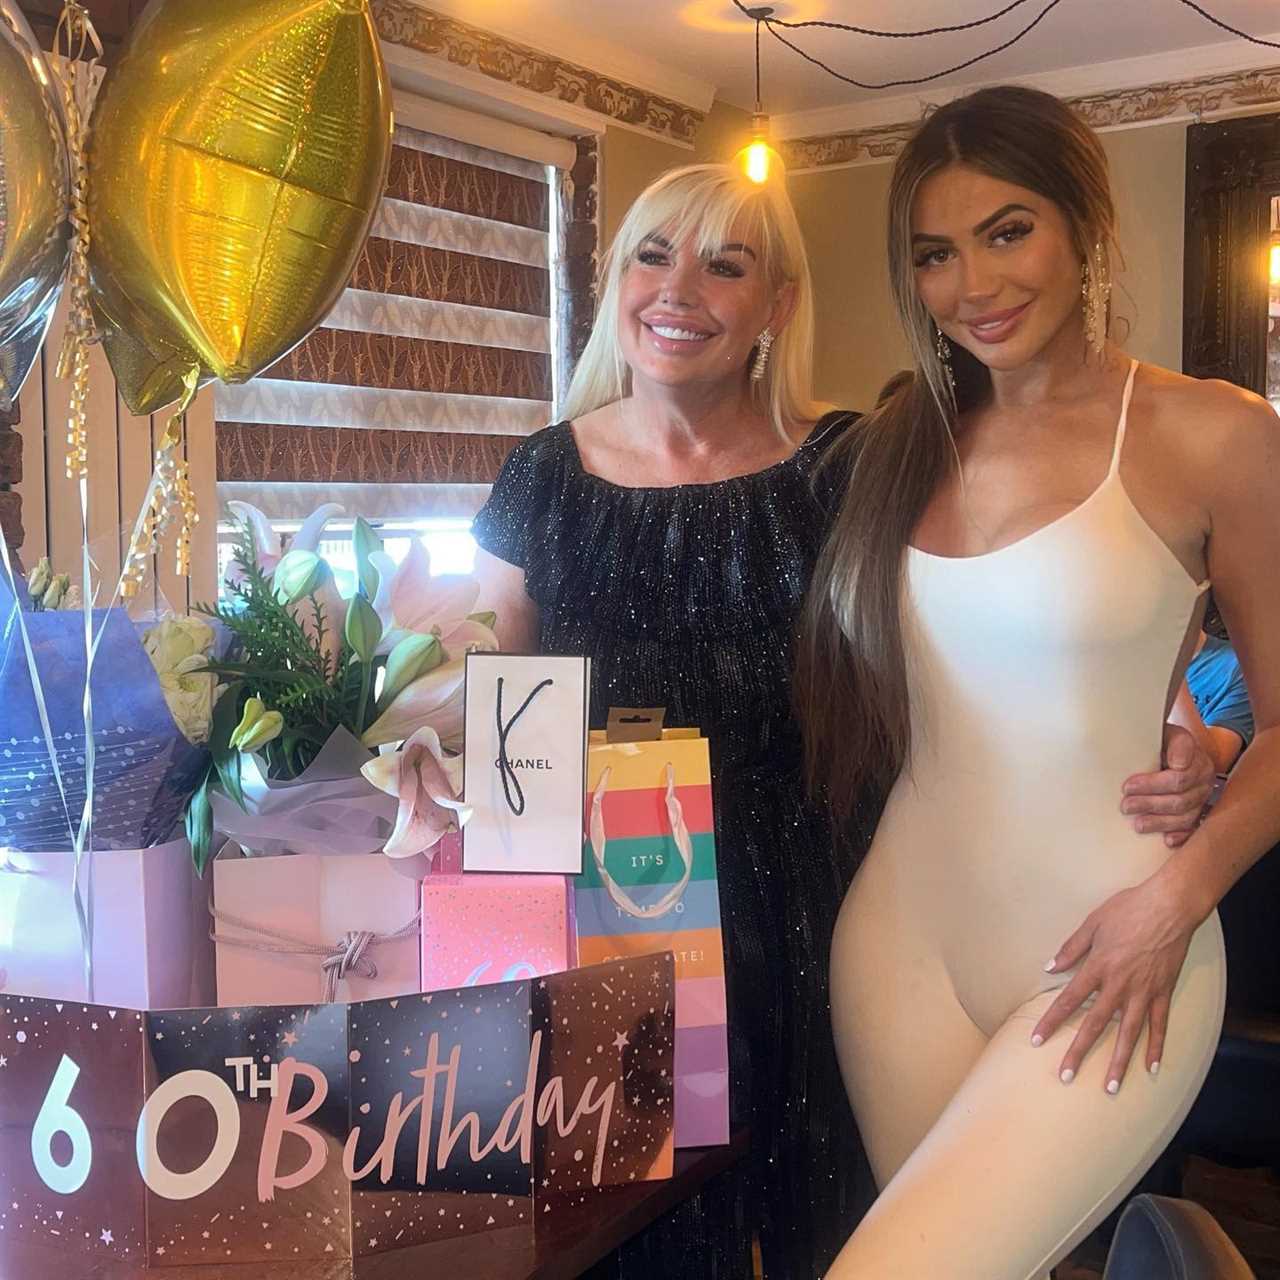 Chloe Ferry goes braless as she shows off curves in see-through dress as mum celebrates her 60th birthday in Magaluf